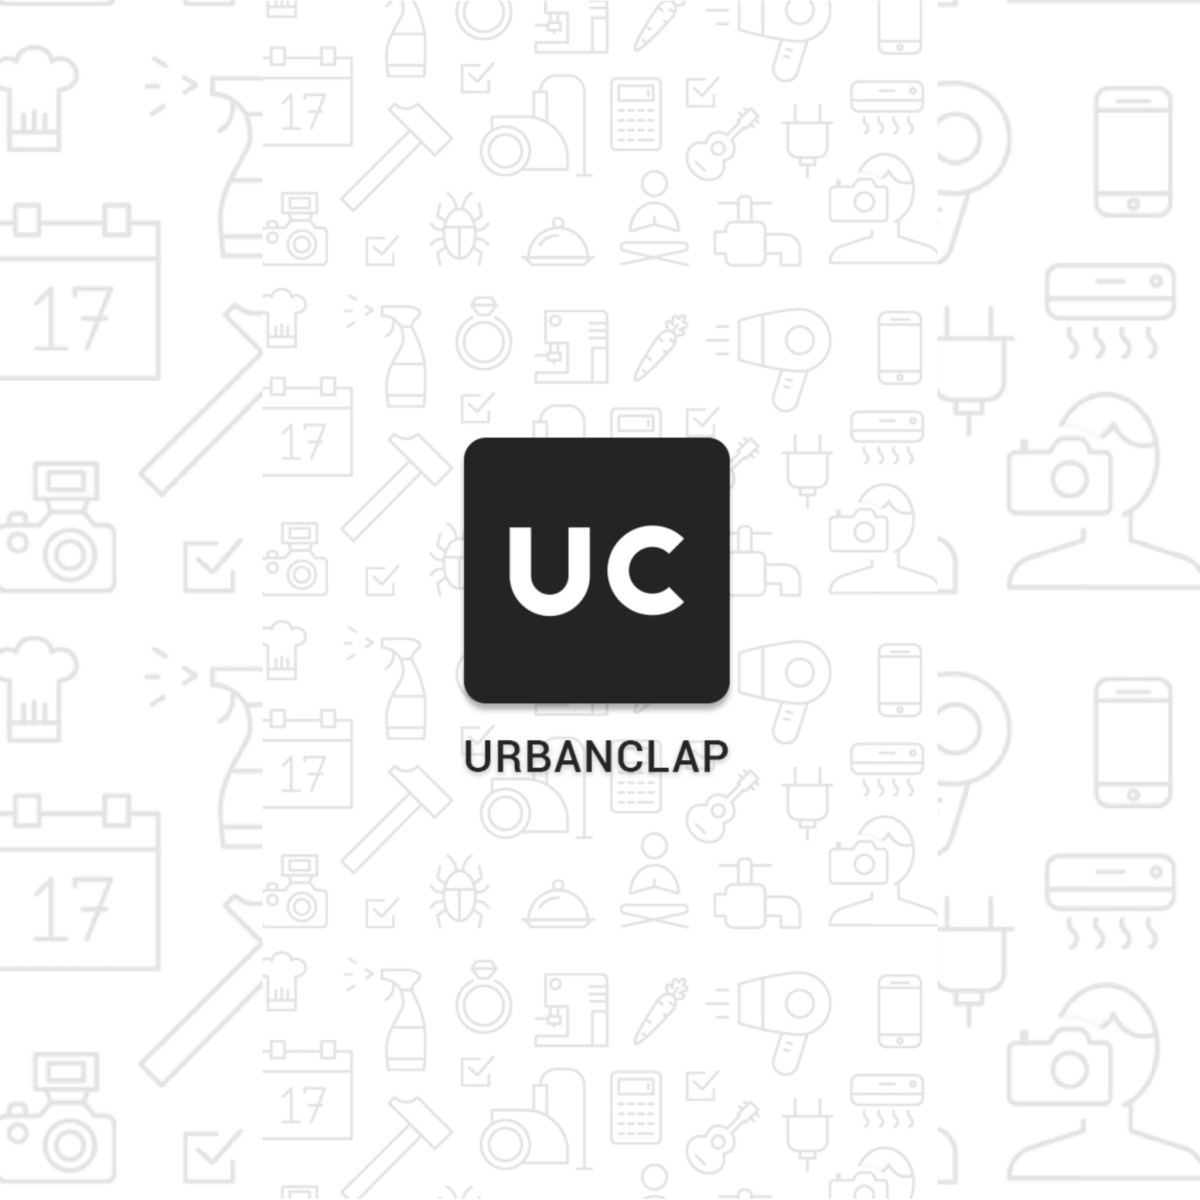 Beauty services at your doorstep by UrbanClap I Review